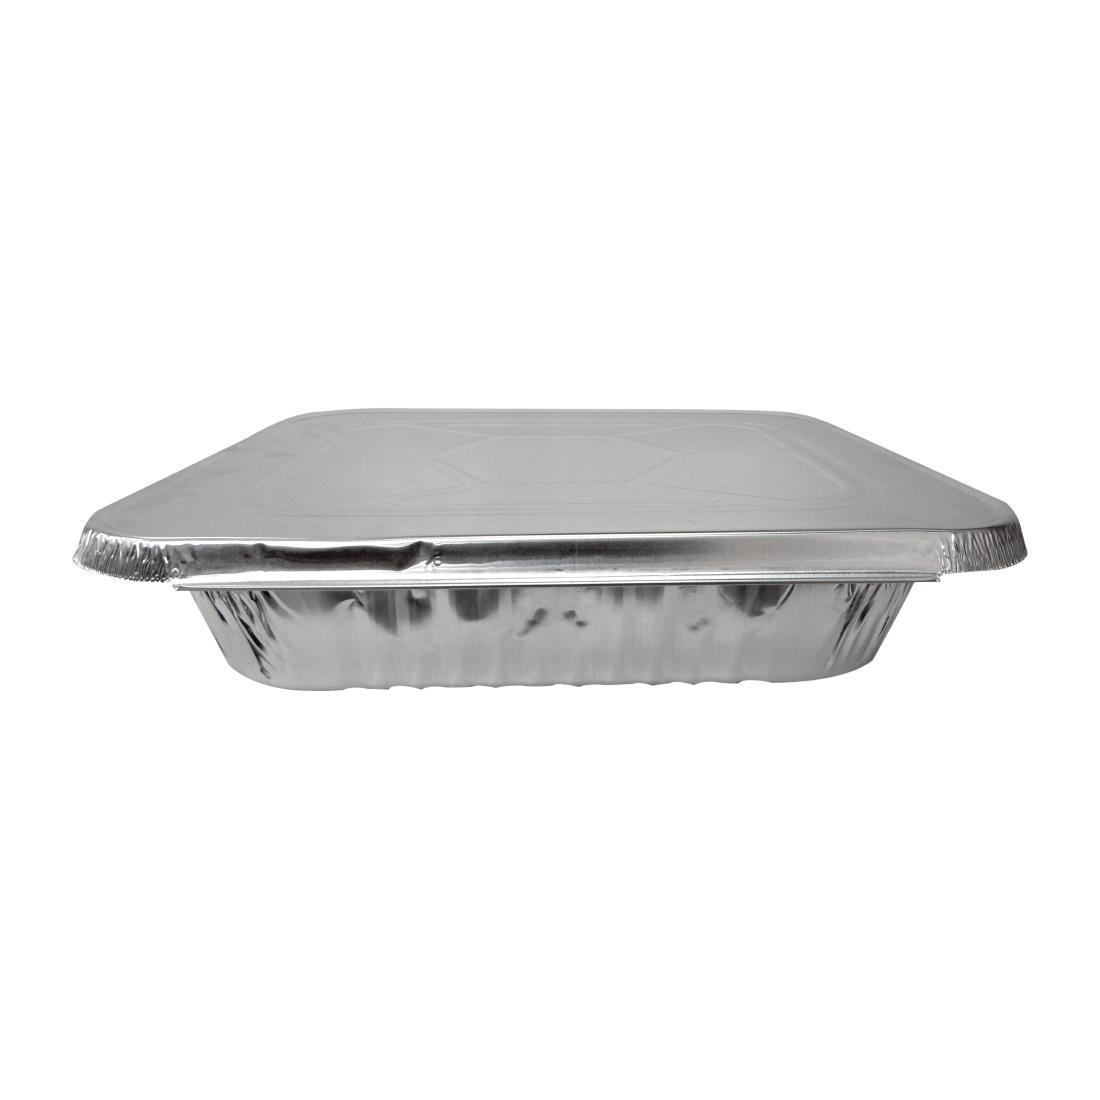 Foil Lid for 1/1 Gastronorm Takeaway Containers (Pack of 50) - FJ857  - 2